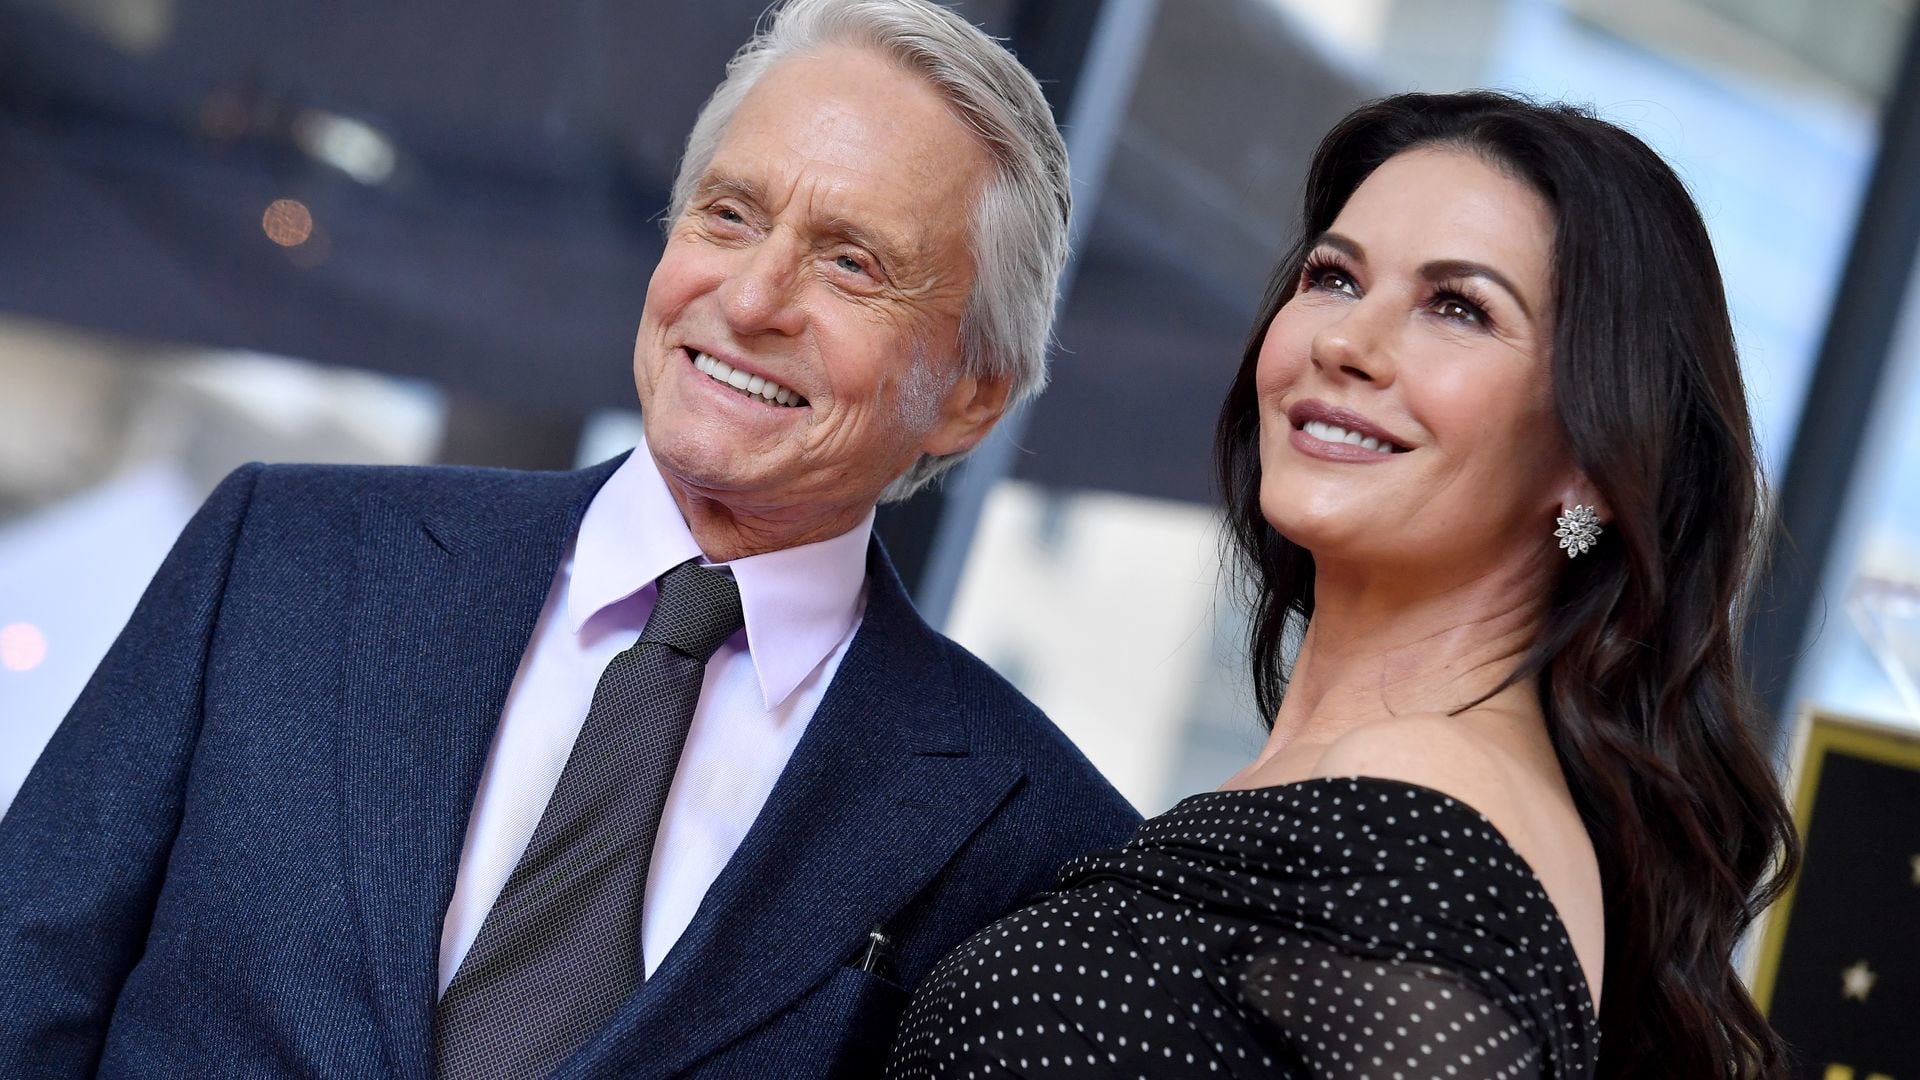 Michael Douglas and Catherine Zeta-Jones attend the ceremony honoring Michael Douglas with star on the Hollywood Walk of Fame on November 06, 2018